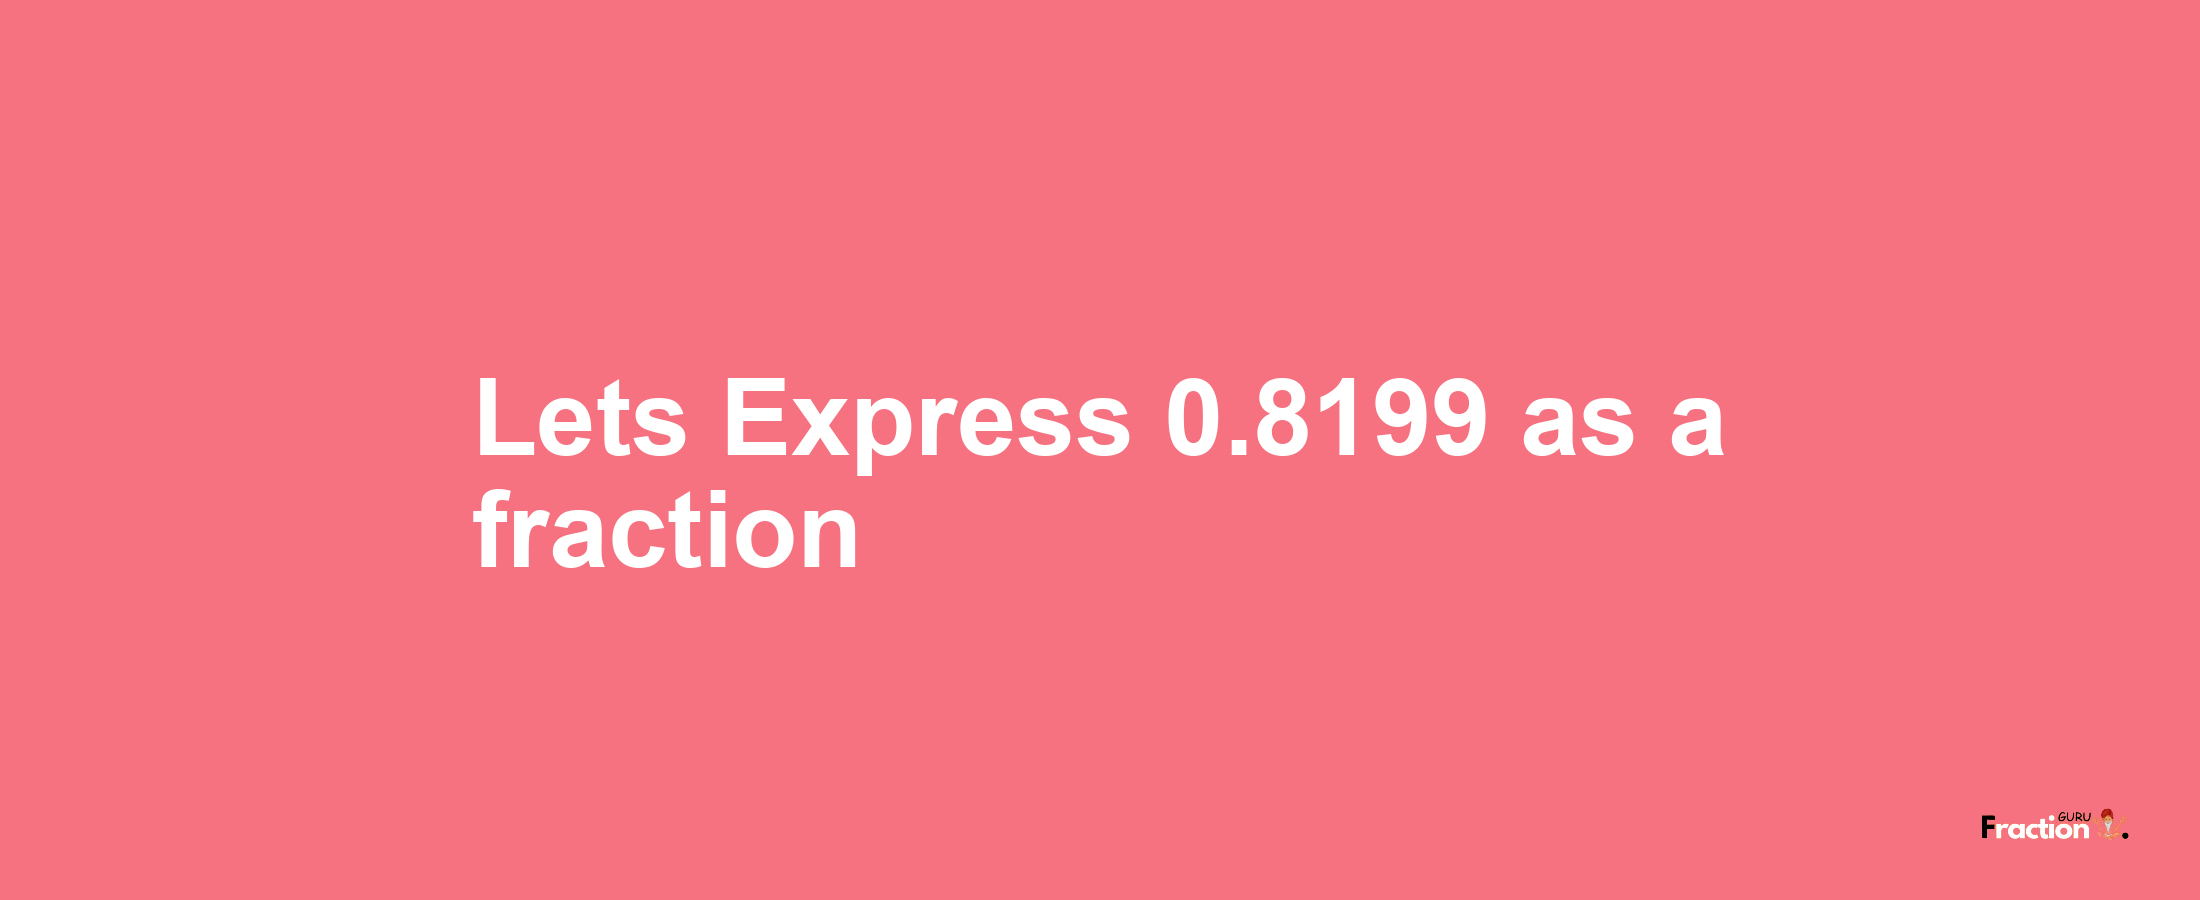 Lets Express 0.8199 as afraction